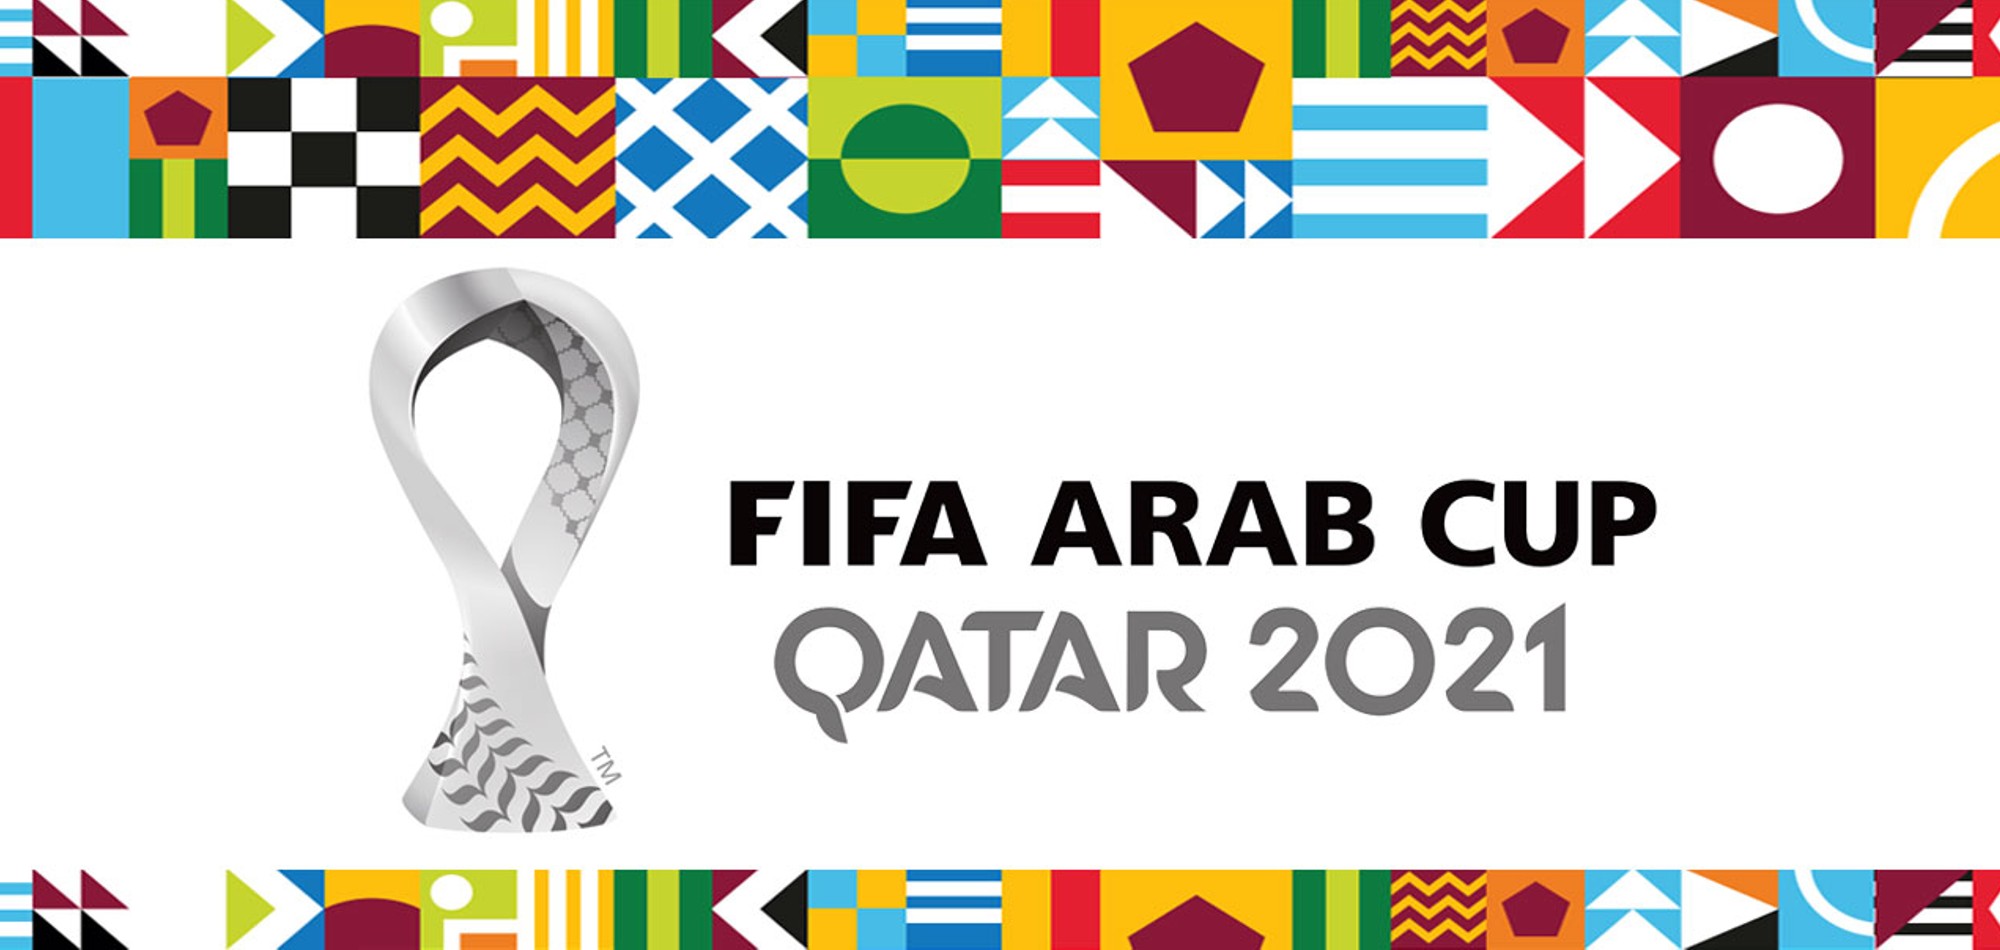 Qatar to offer a unique experience of the FIFA Arab Cup 2021